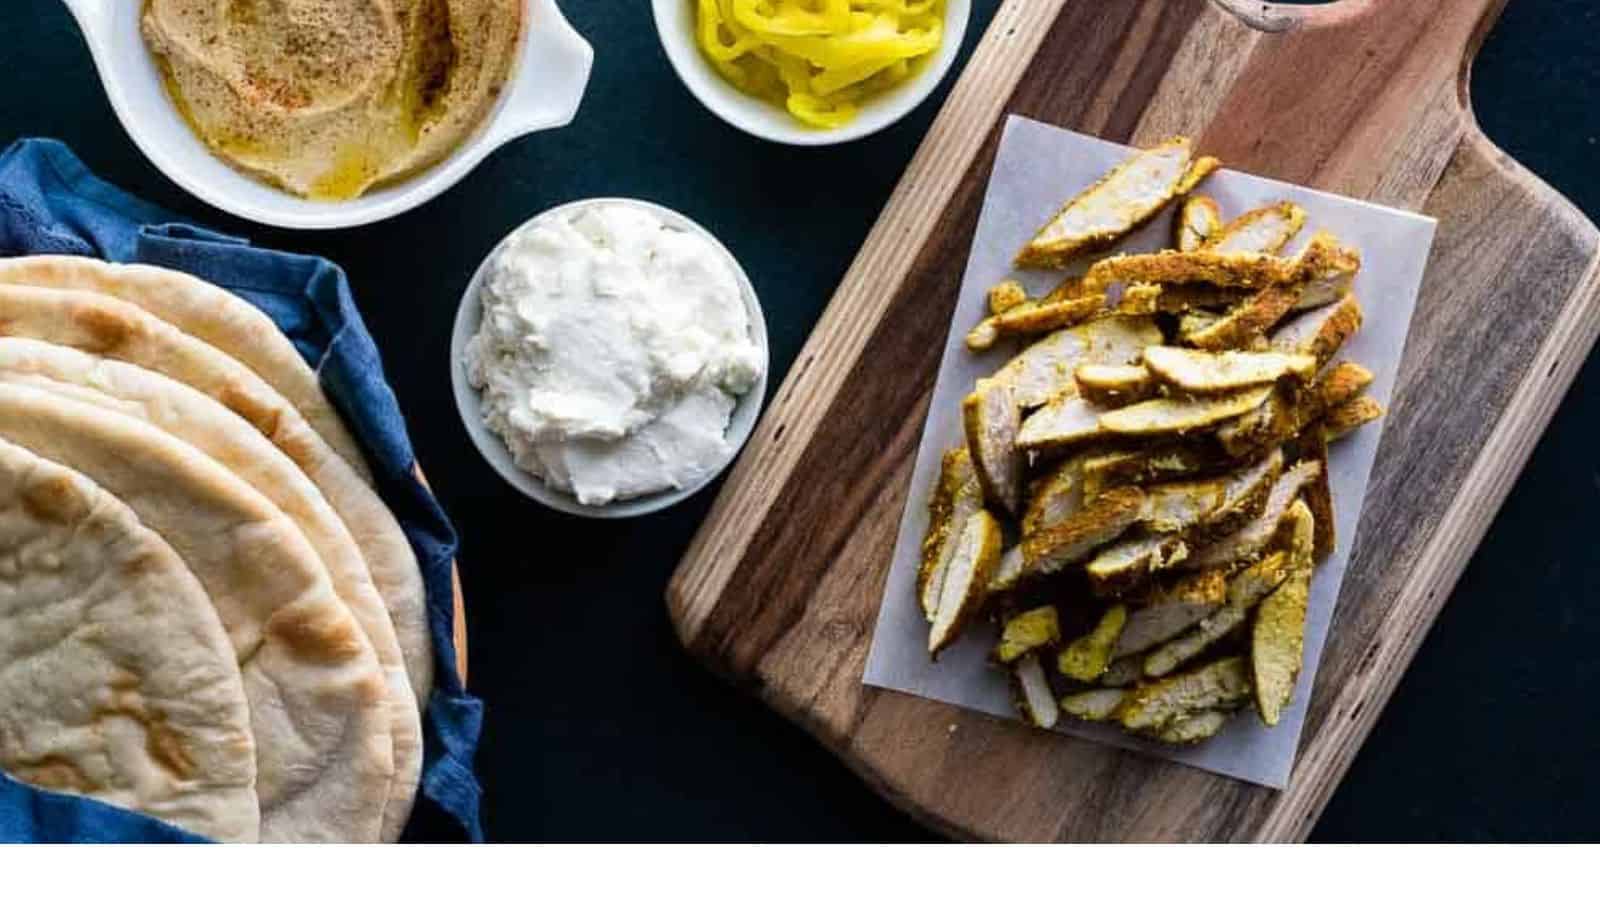 An easy and appetizing combination of pita bread, hummus, and tzatziki sauce showcased on a wooden cutting board.